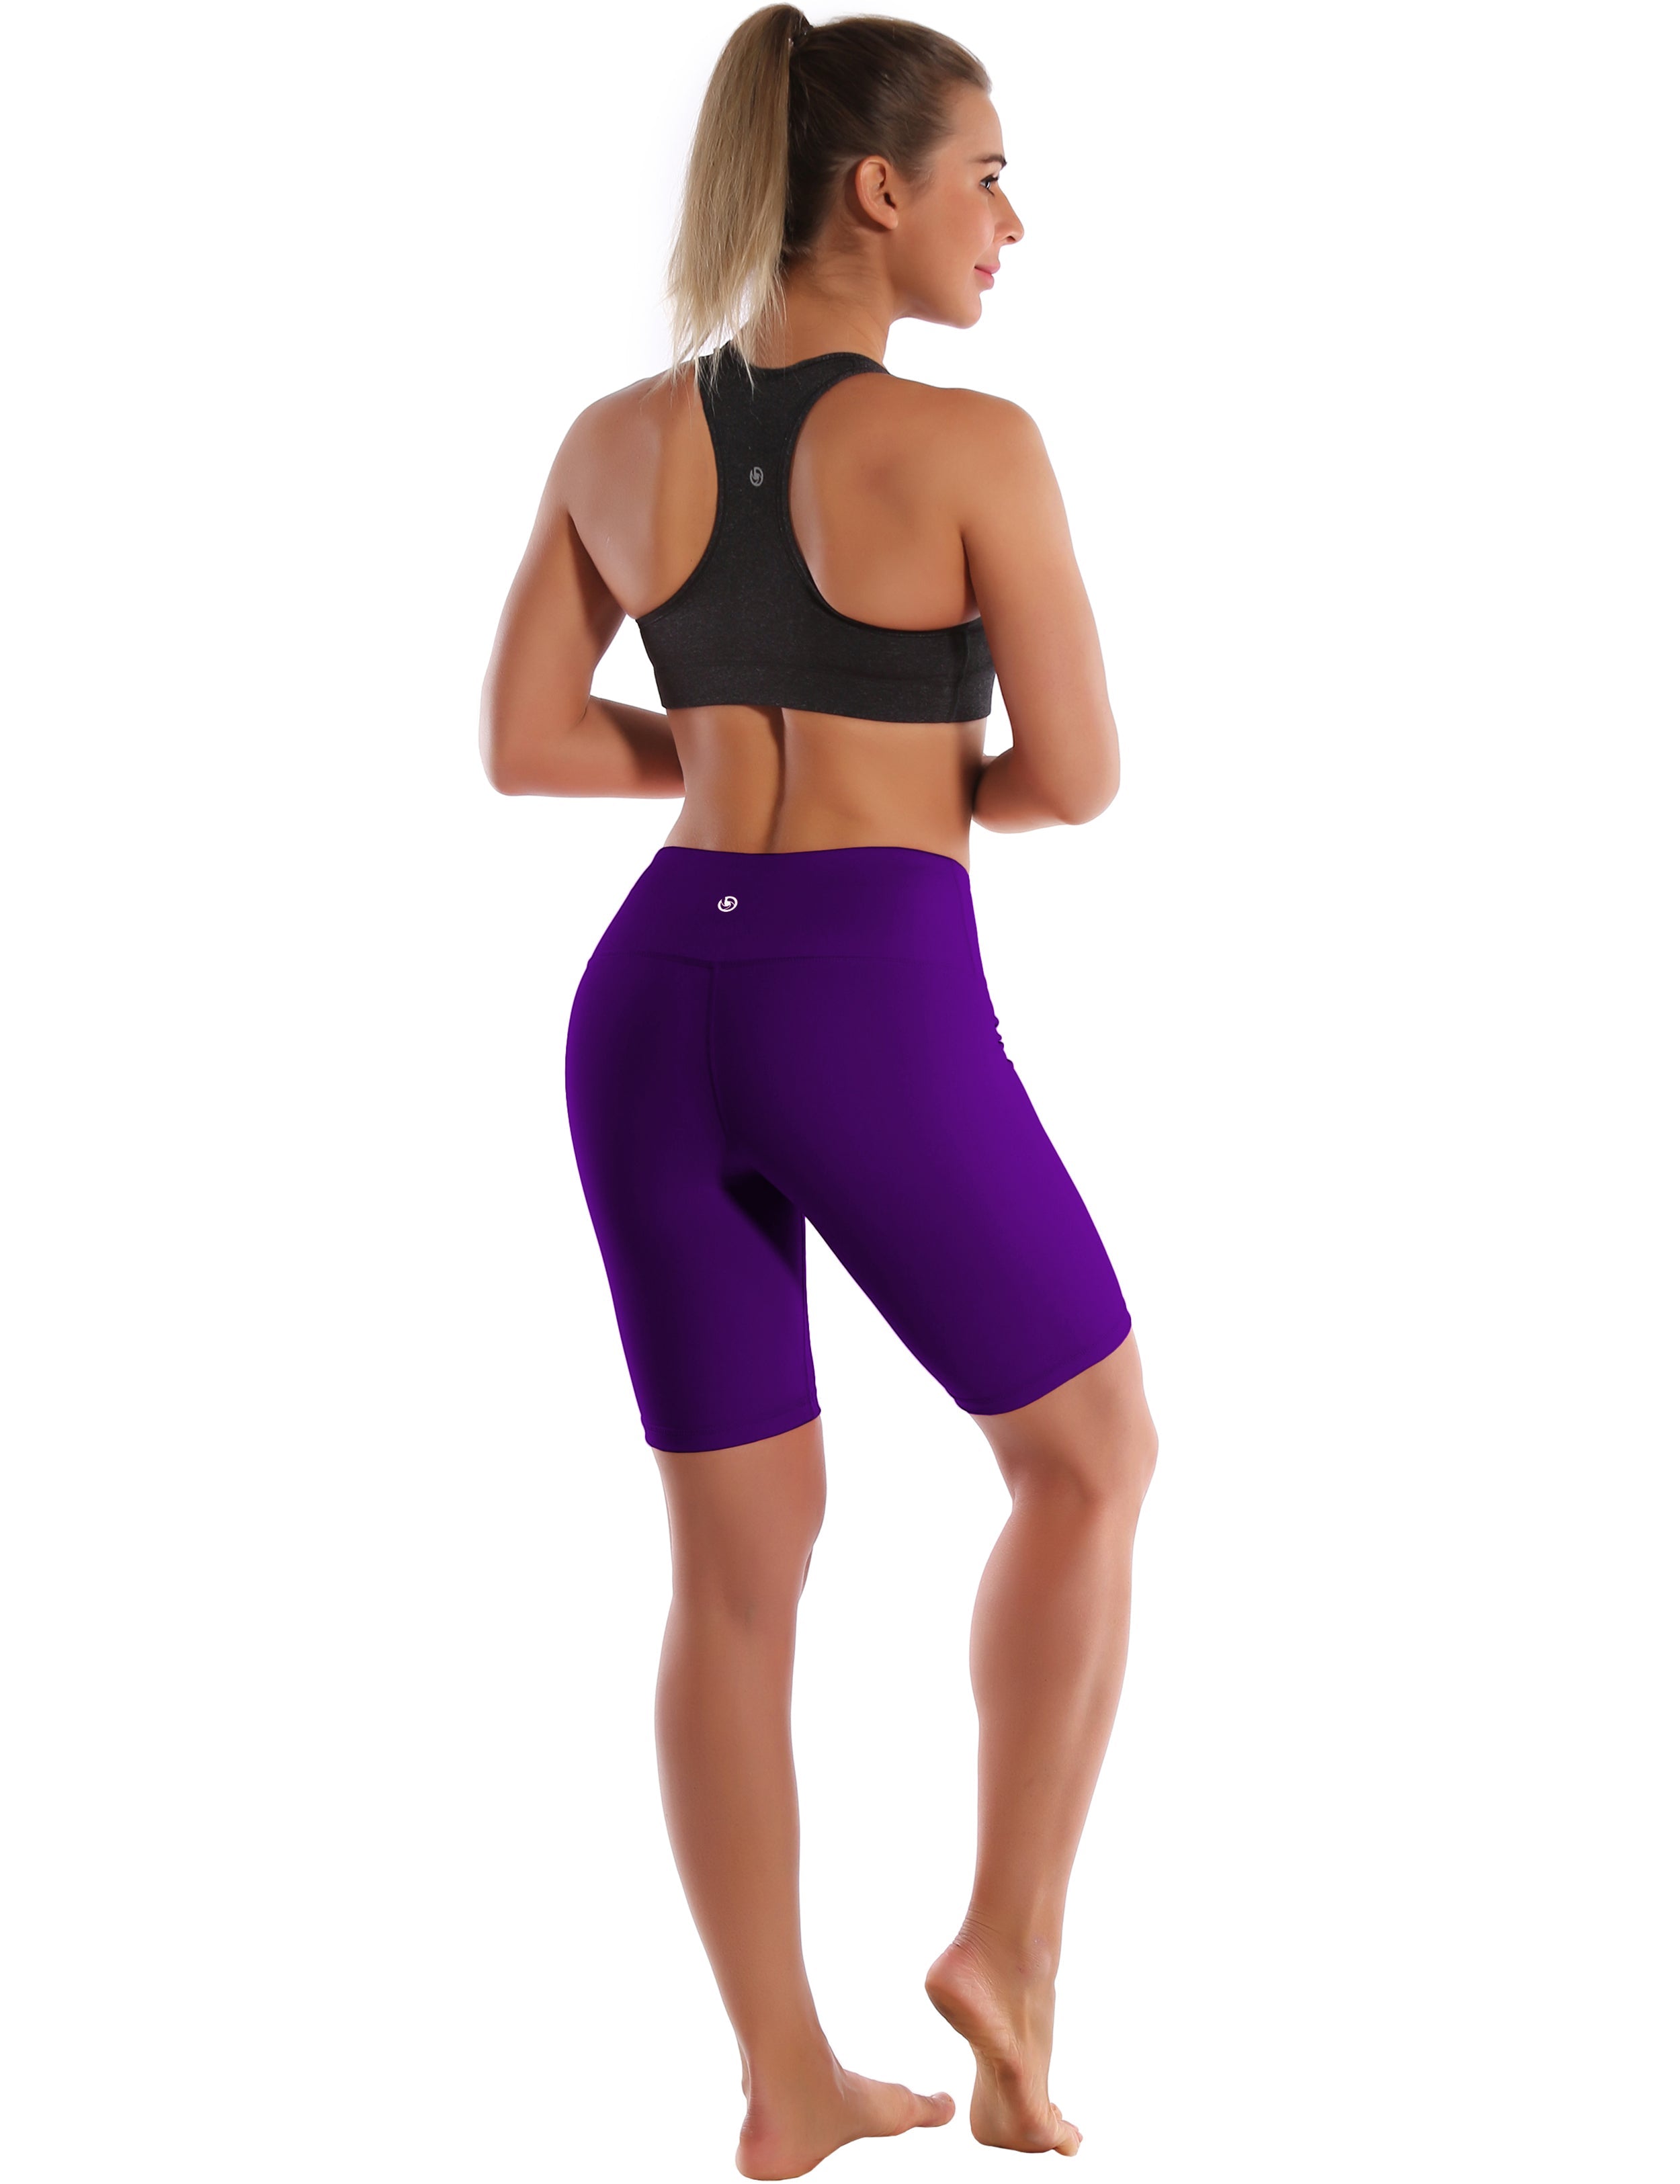 8" High Waist yogastudio Shorts eggplantpurple Sleek, soft, smooth and totally comfortable: our newest style is here. Softest-ever fabric High elasticity High density 4-way stretch Fabric doesn't attract lint easily No see-through Moisture-wicking Machine wash 75% Nylon, 25% Spandex